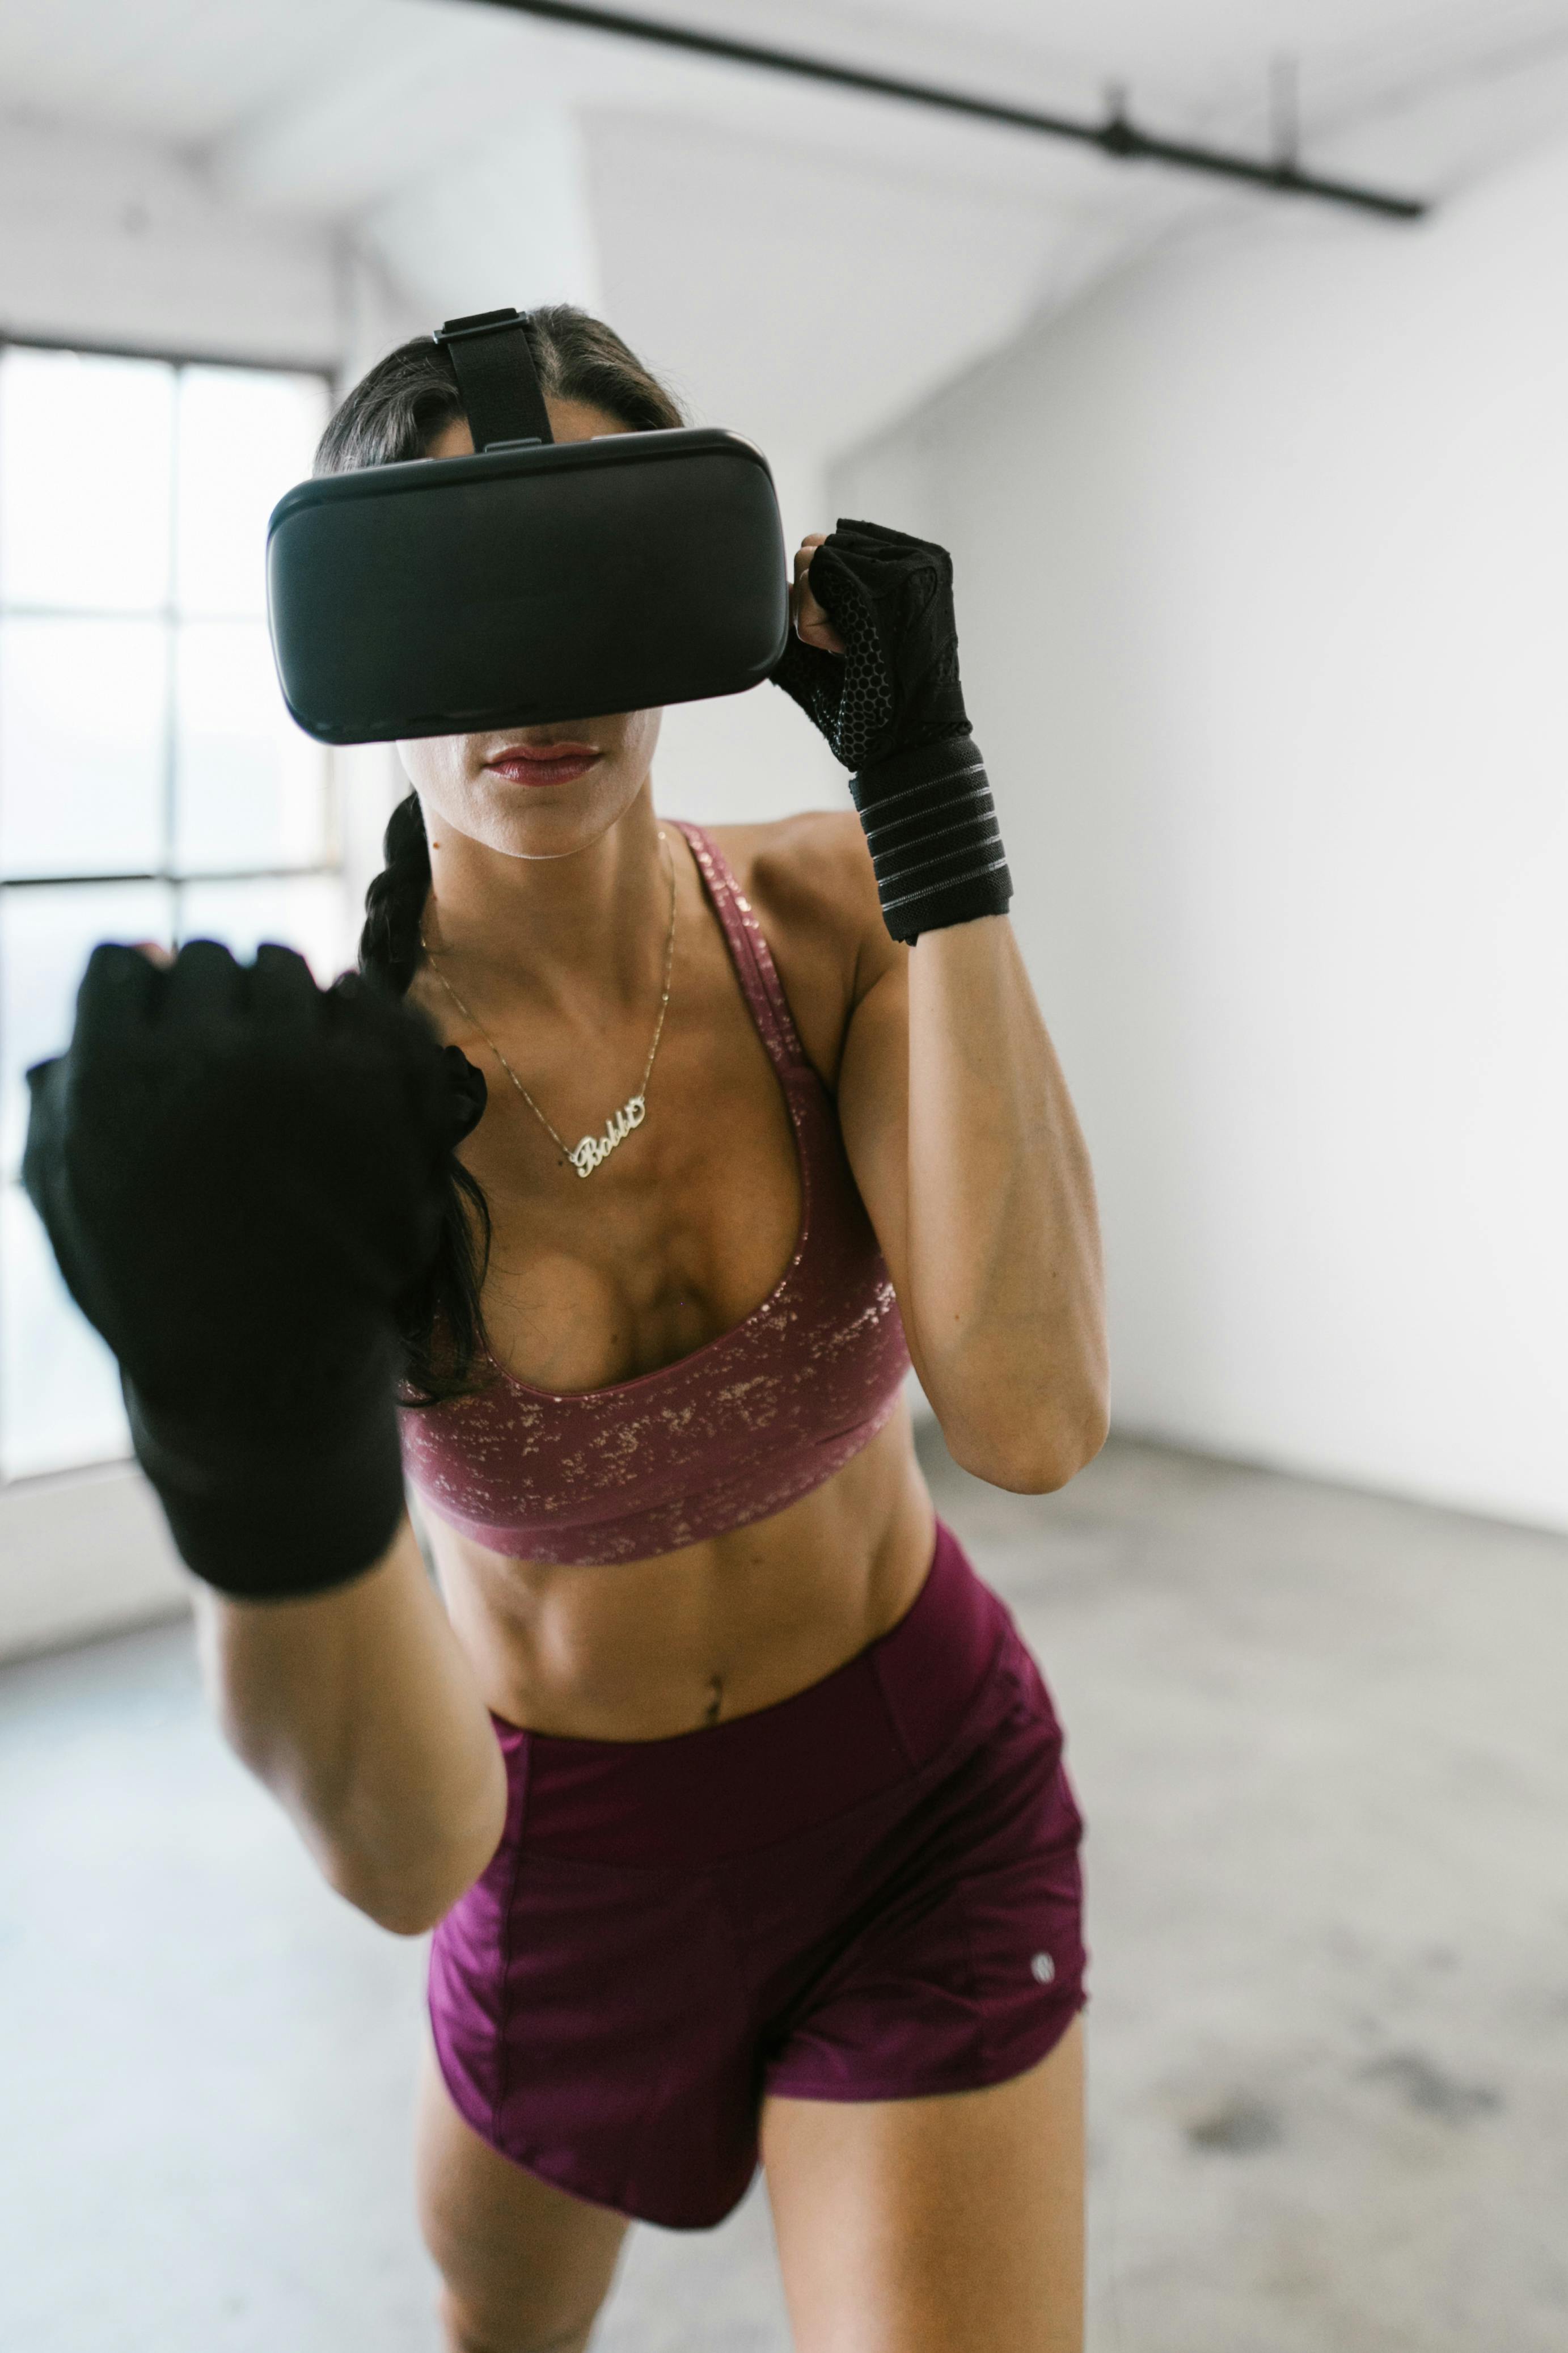 Fitness at Your Fingertips: The Best Virtual Classes for Staying Fit